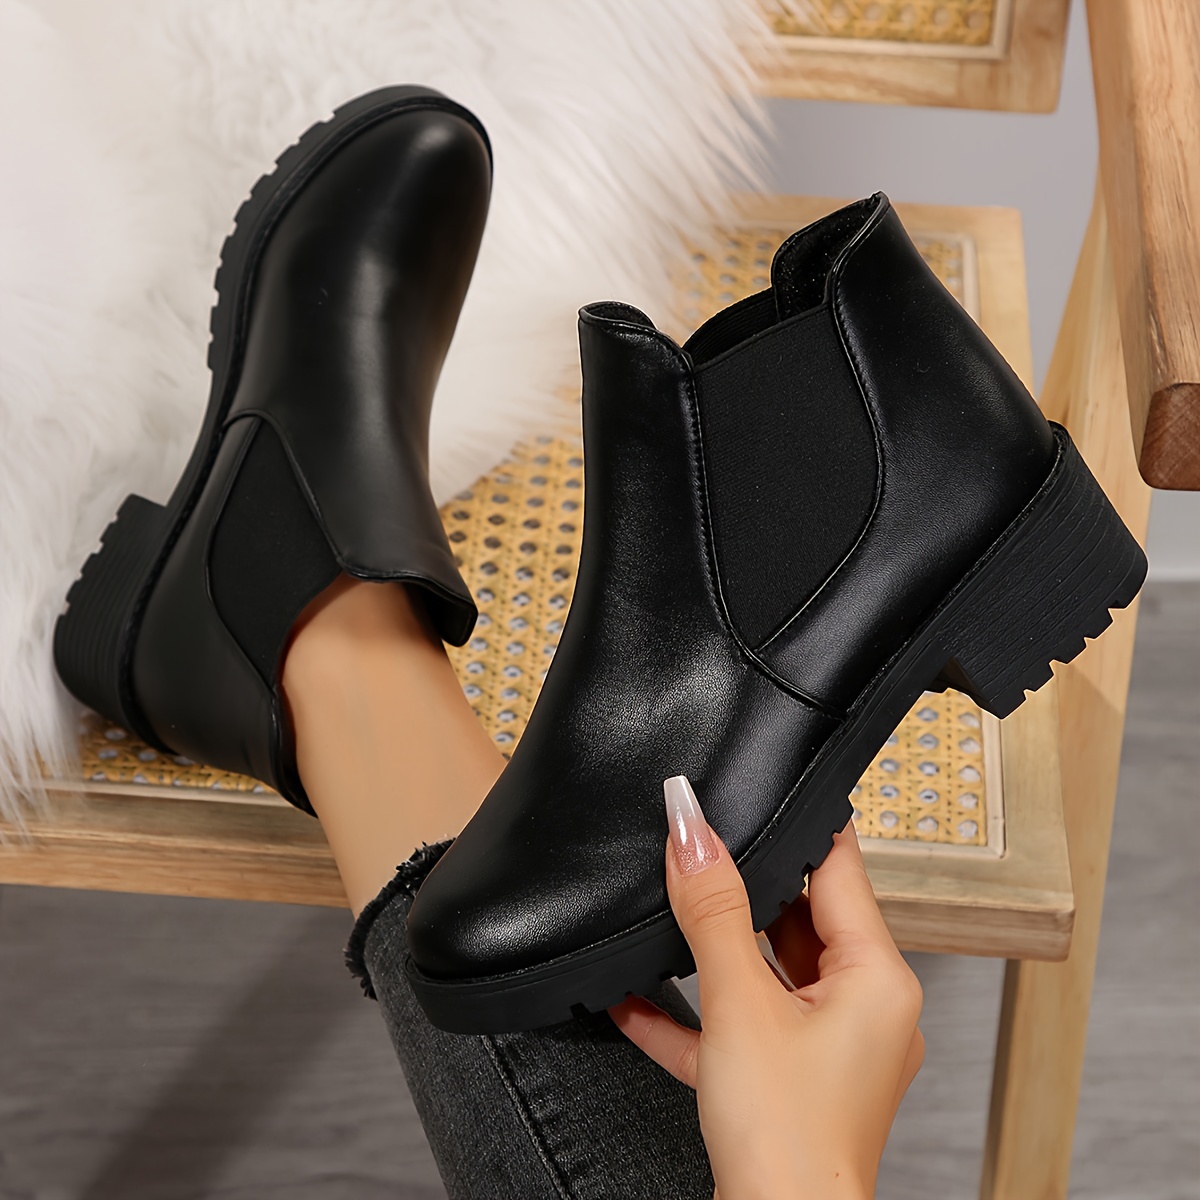 

Women's Classic Design Chelsea Boots, Versatile Chunky Low Heeled Short Boots, Fashion Slip On Ankle Boots